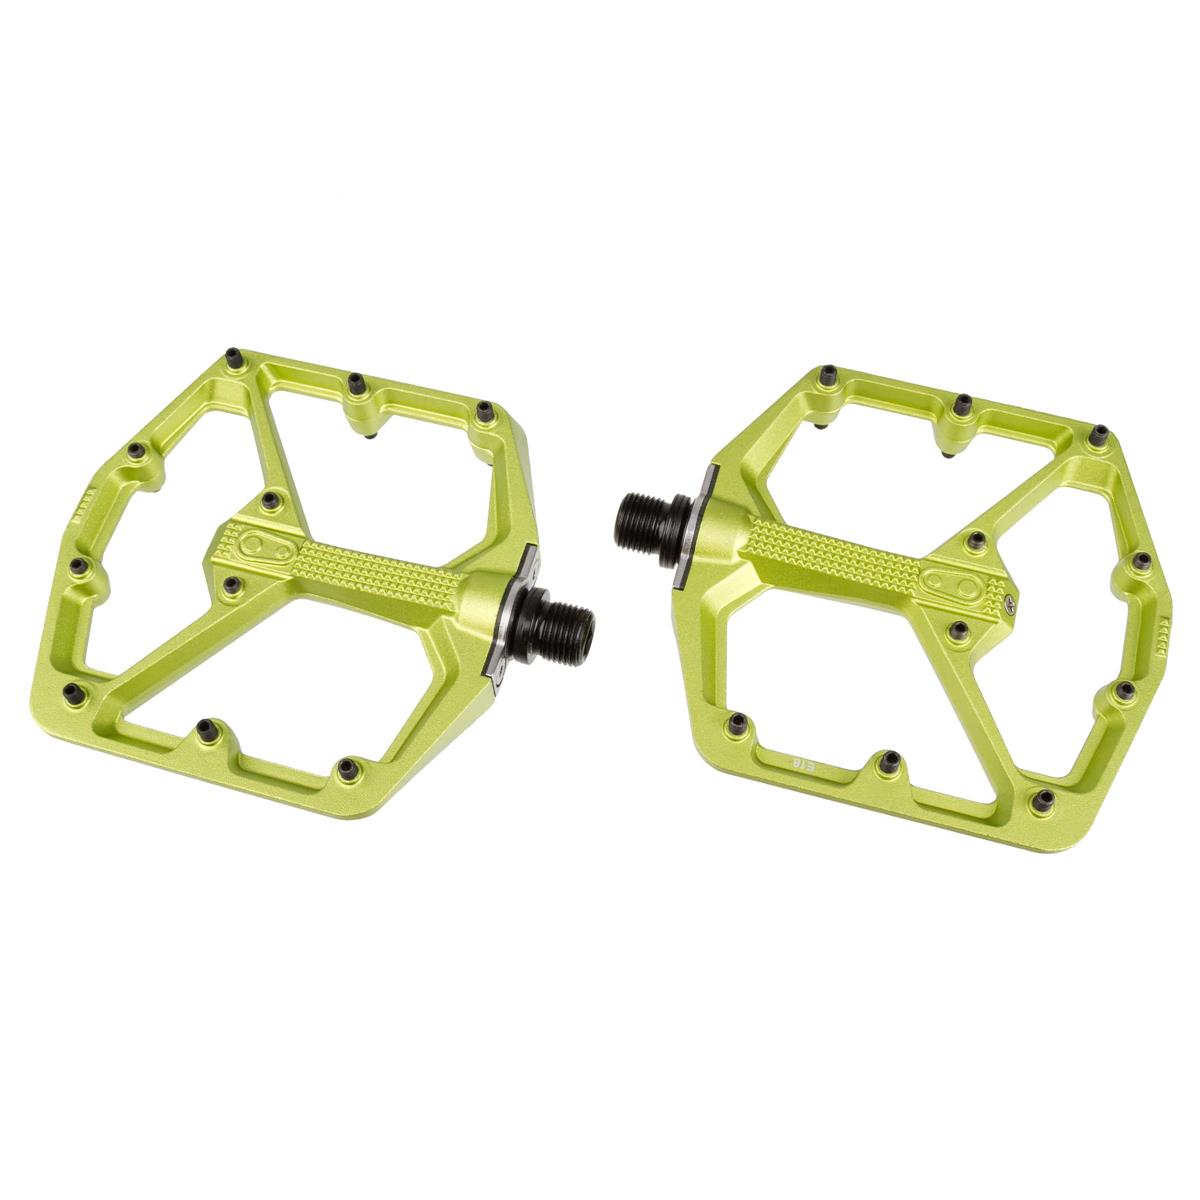 Crankbrothers Pedals Stamp 7 Limited Edition, Green, Large